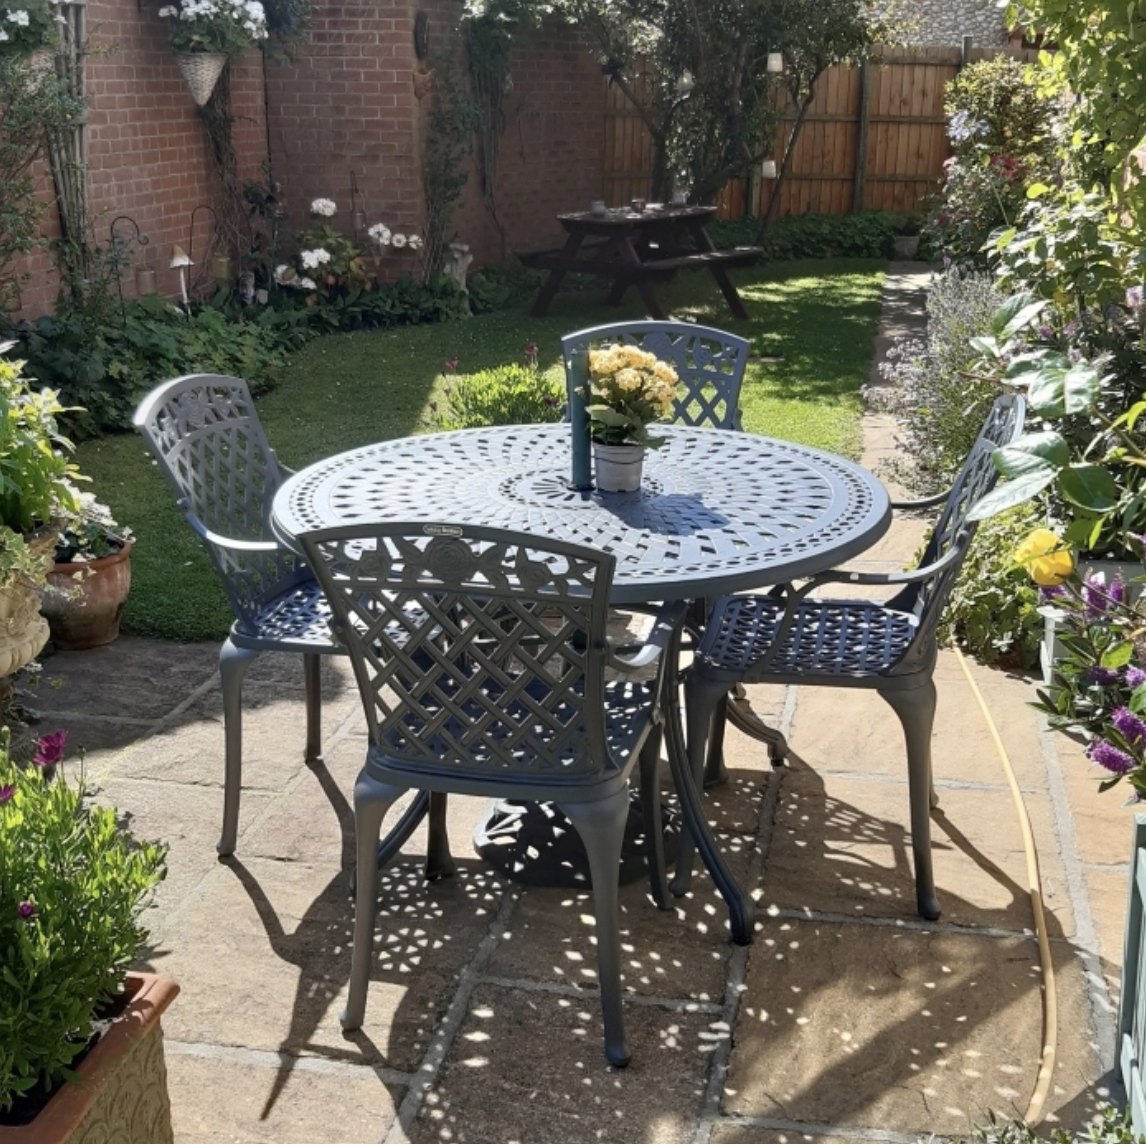 Why purchase round garden tables?